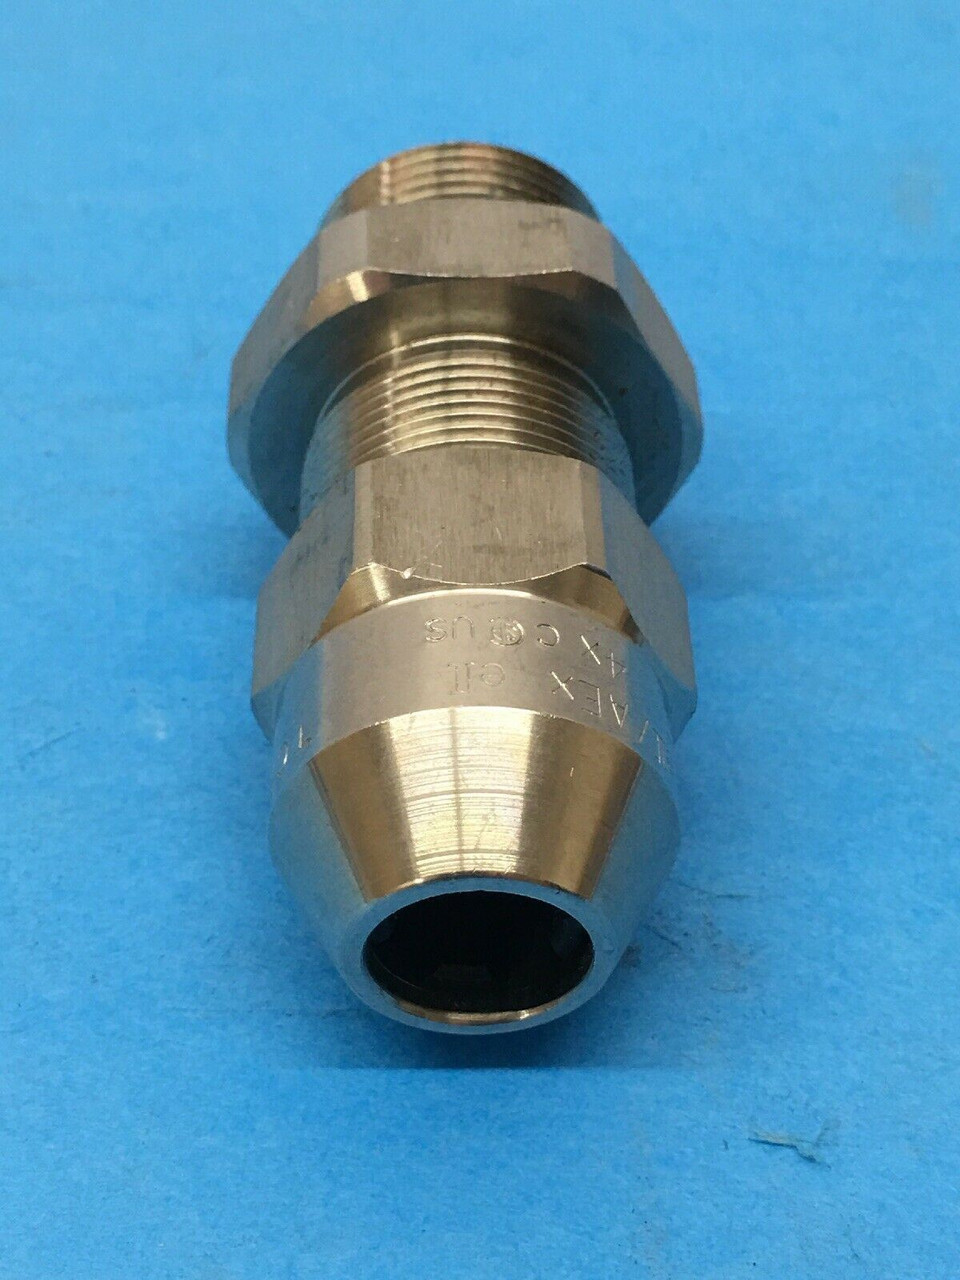 Cable Collar Fitting 1002454 Force Protection Industries 3/4 Stainless Steel